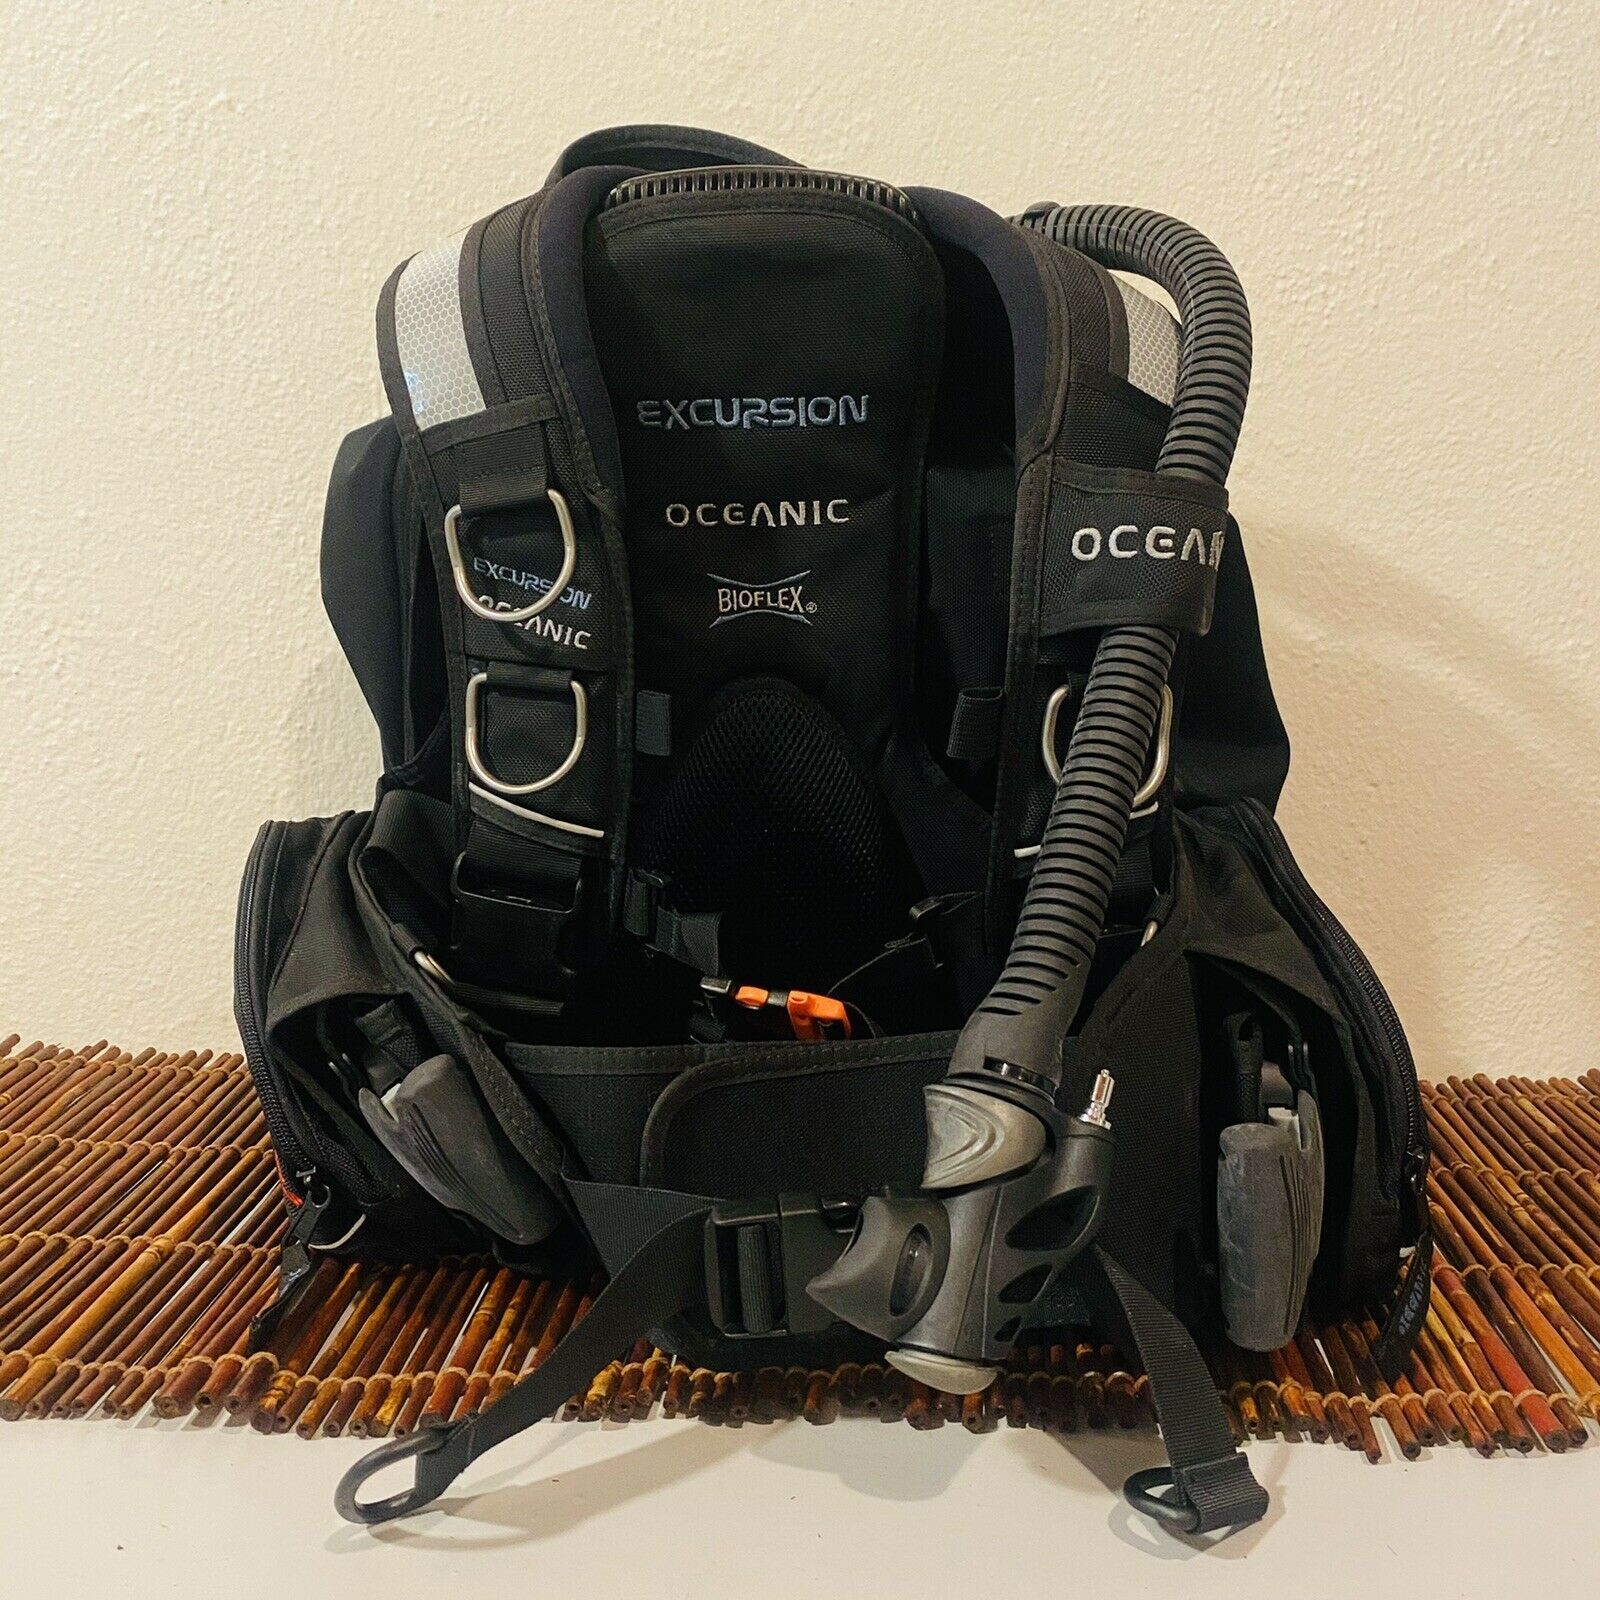 Primary image for Oceanic Excursion QLR3 BCD. Never Used. No tags or Original Packaging.